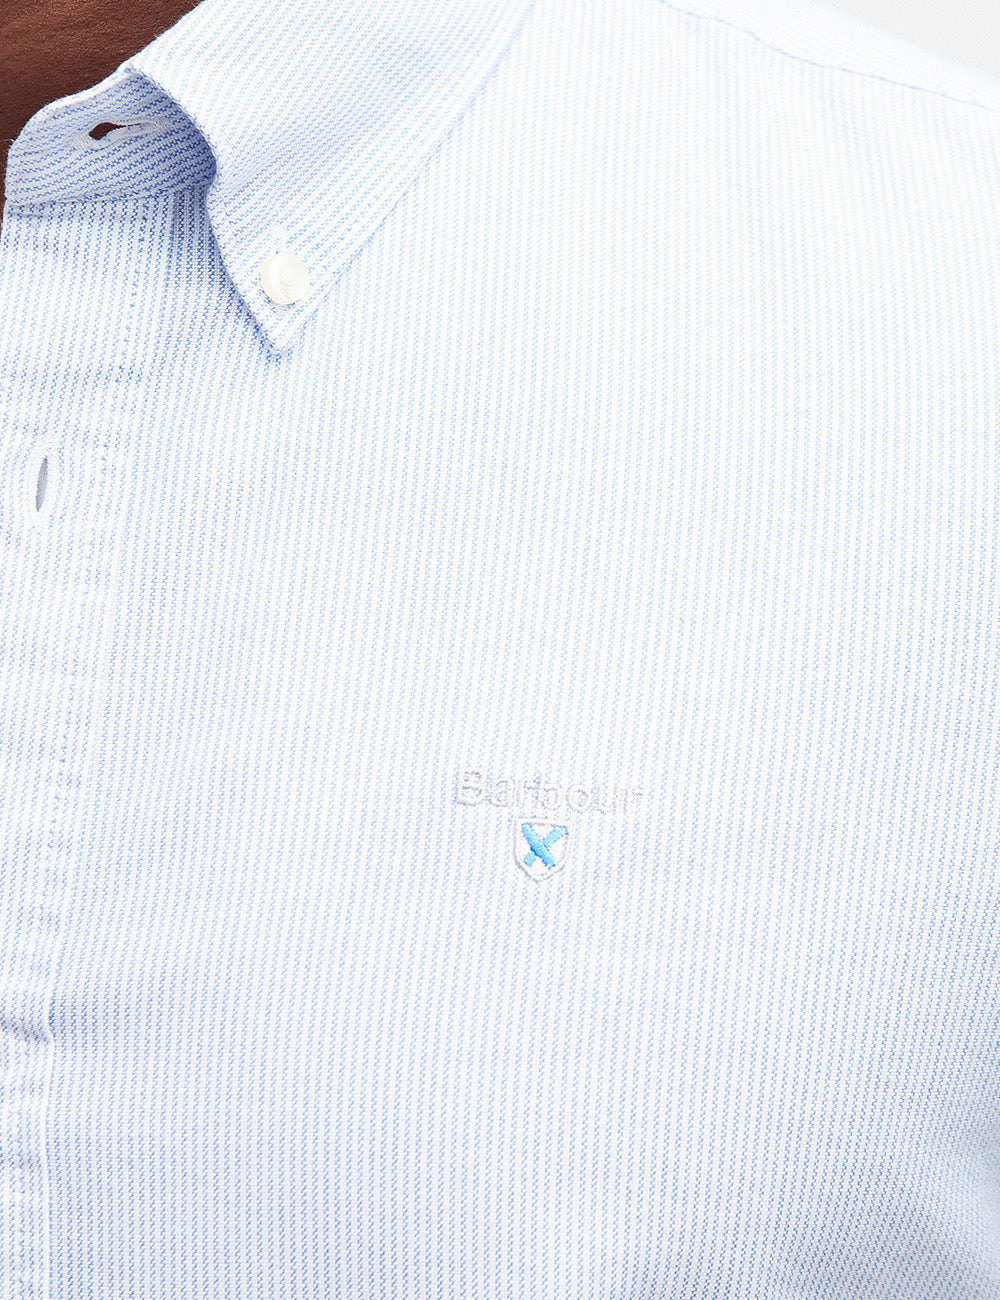 Barbour Striped Oxtown Tailored Shirt - Sky Blue